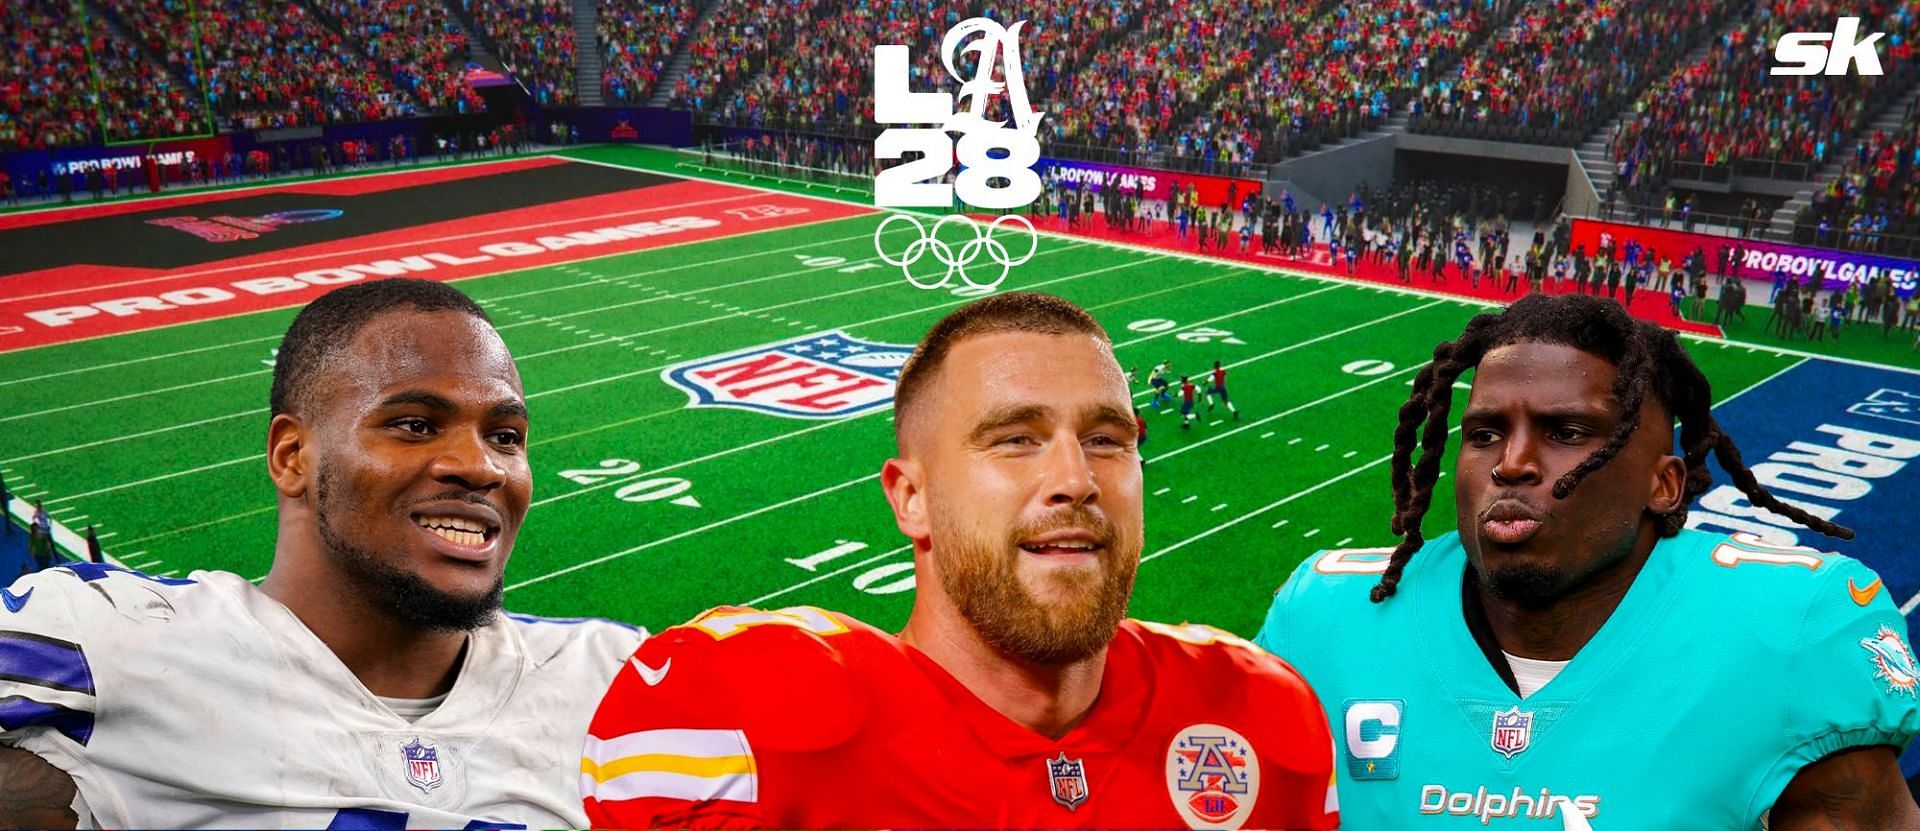 NFL Players Have Real Interest in Flag Football at 2028 Olympics